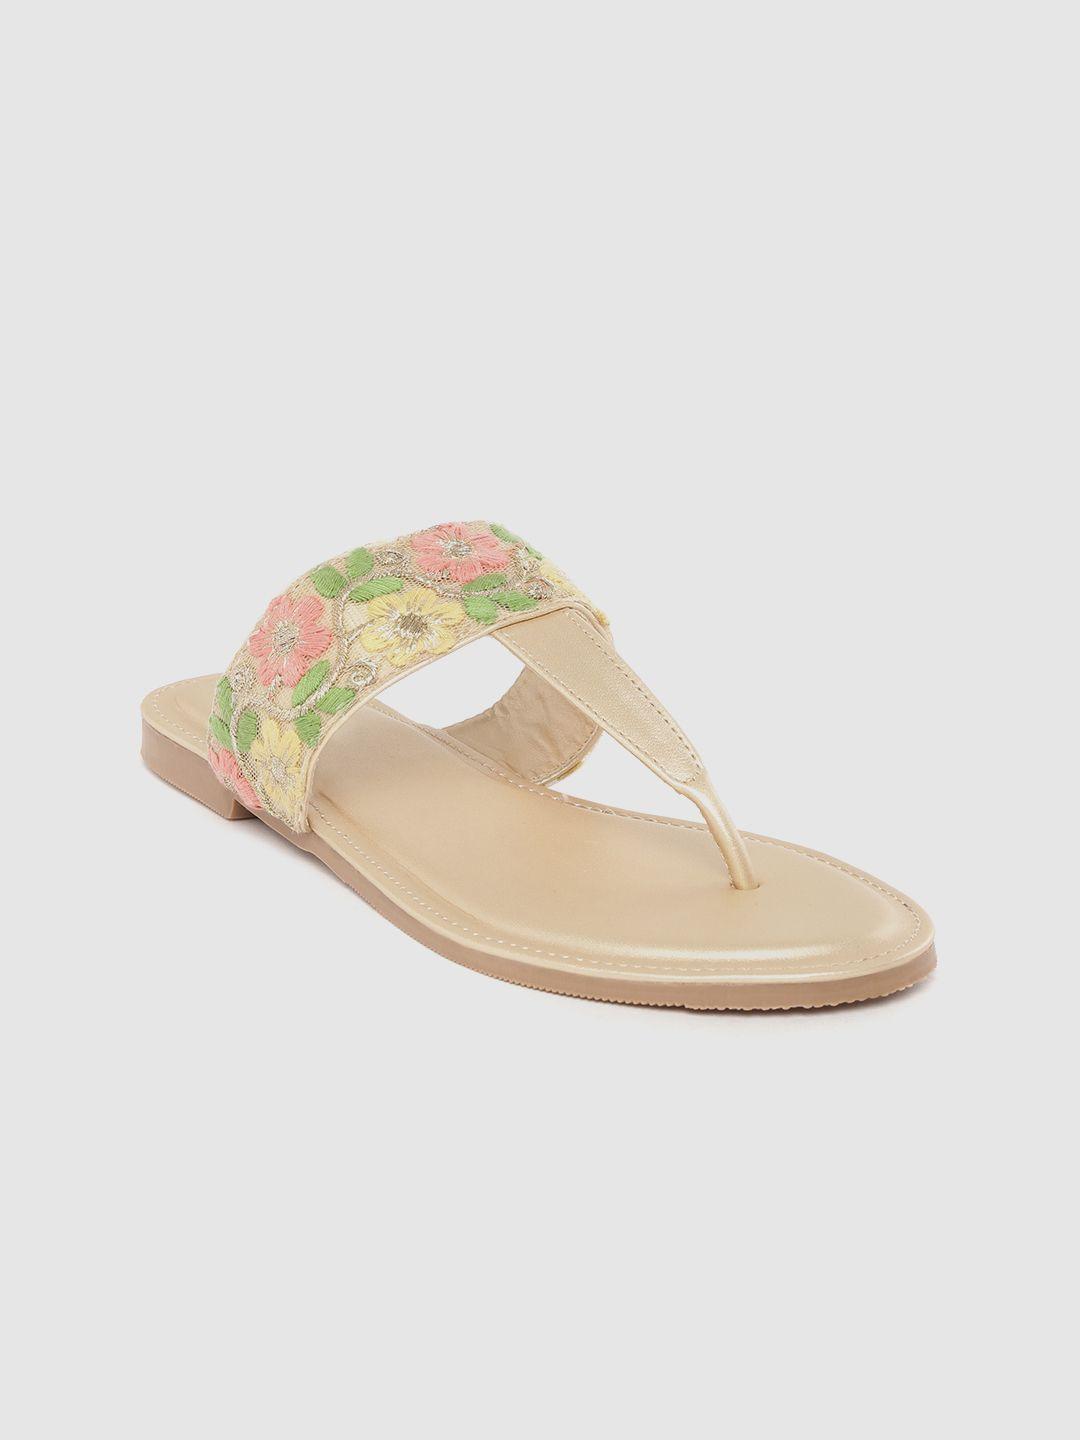 marc loire women pink & green floral embroidered t-strap flats